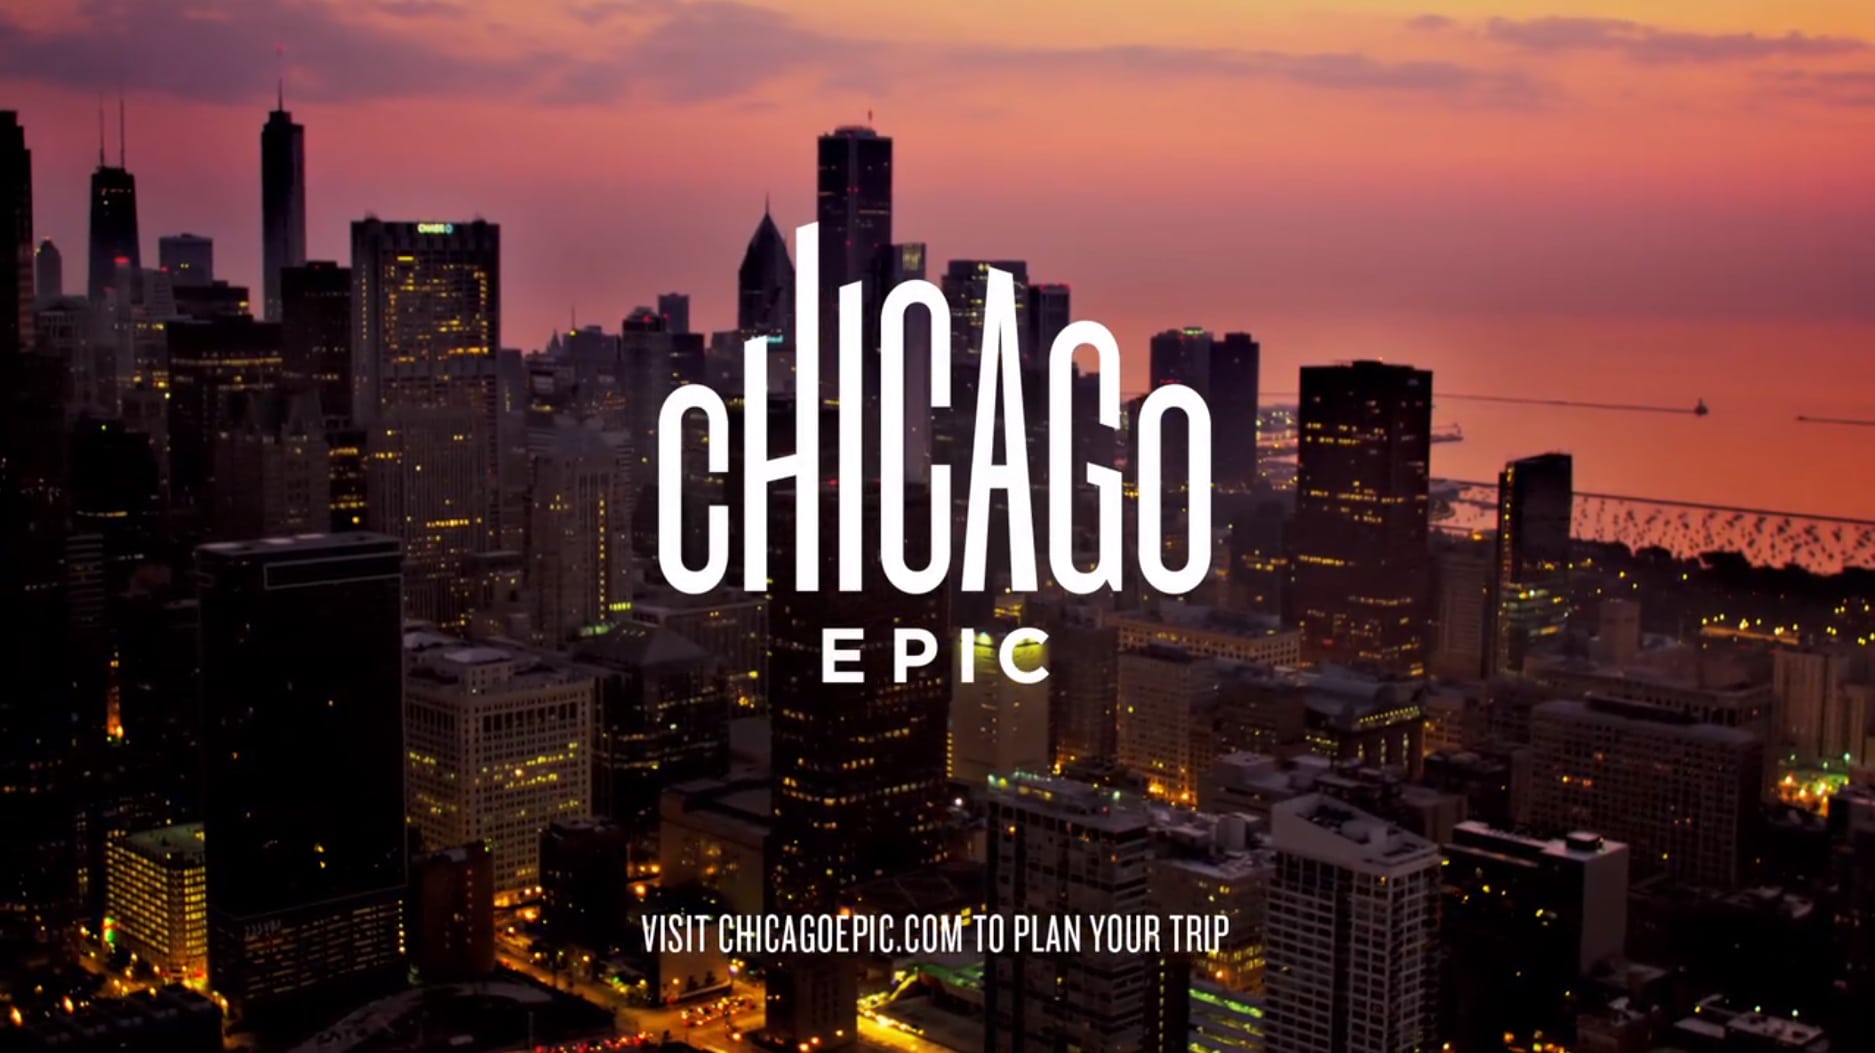 A clip from Choose Chicago's new 'Epic' advertising campaign.